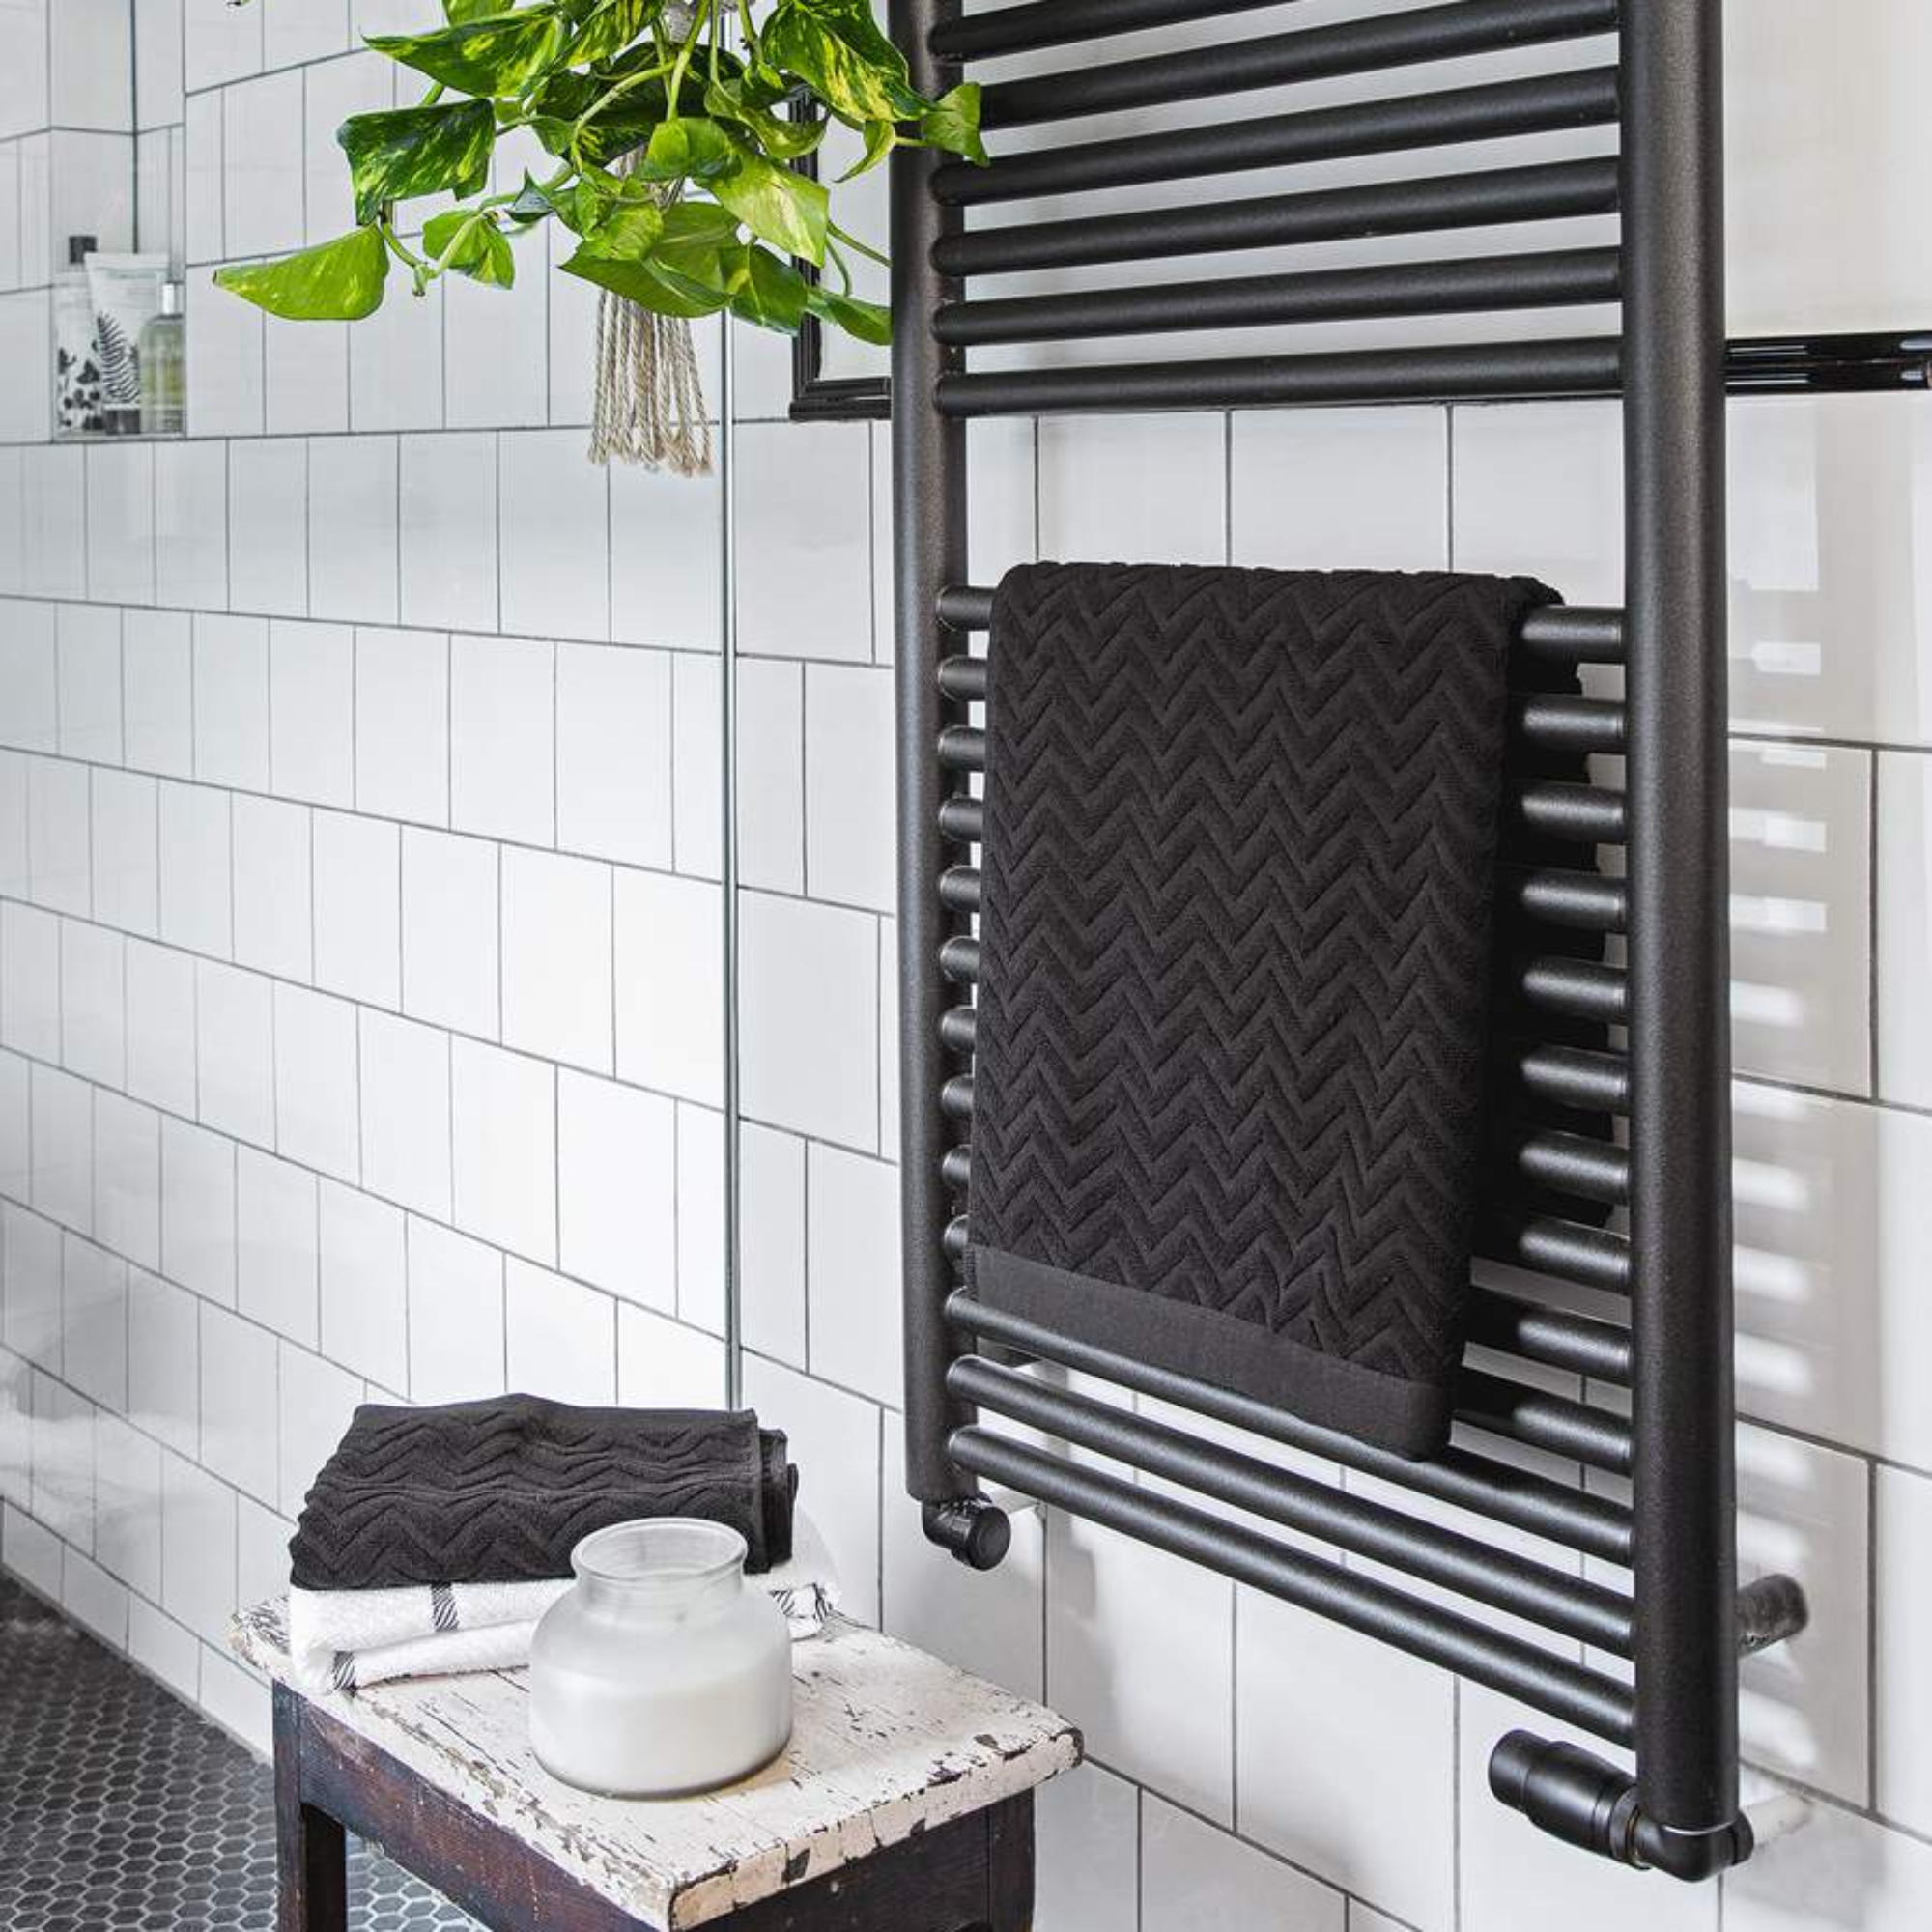 Close up of a black towel radiator on a white tiled wall in the bathroom